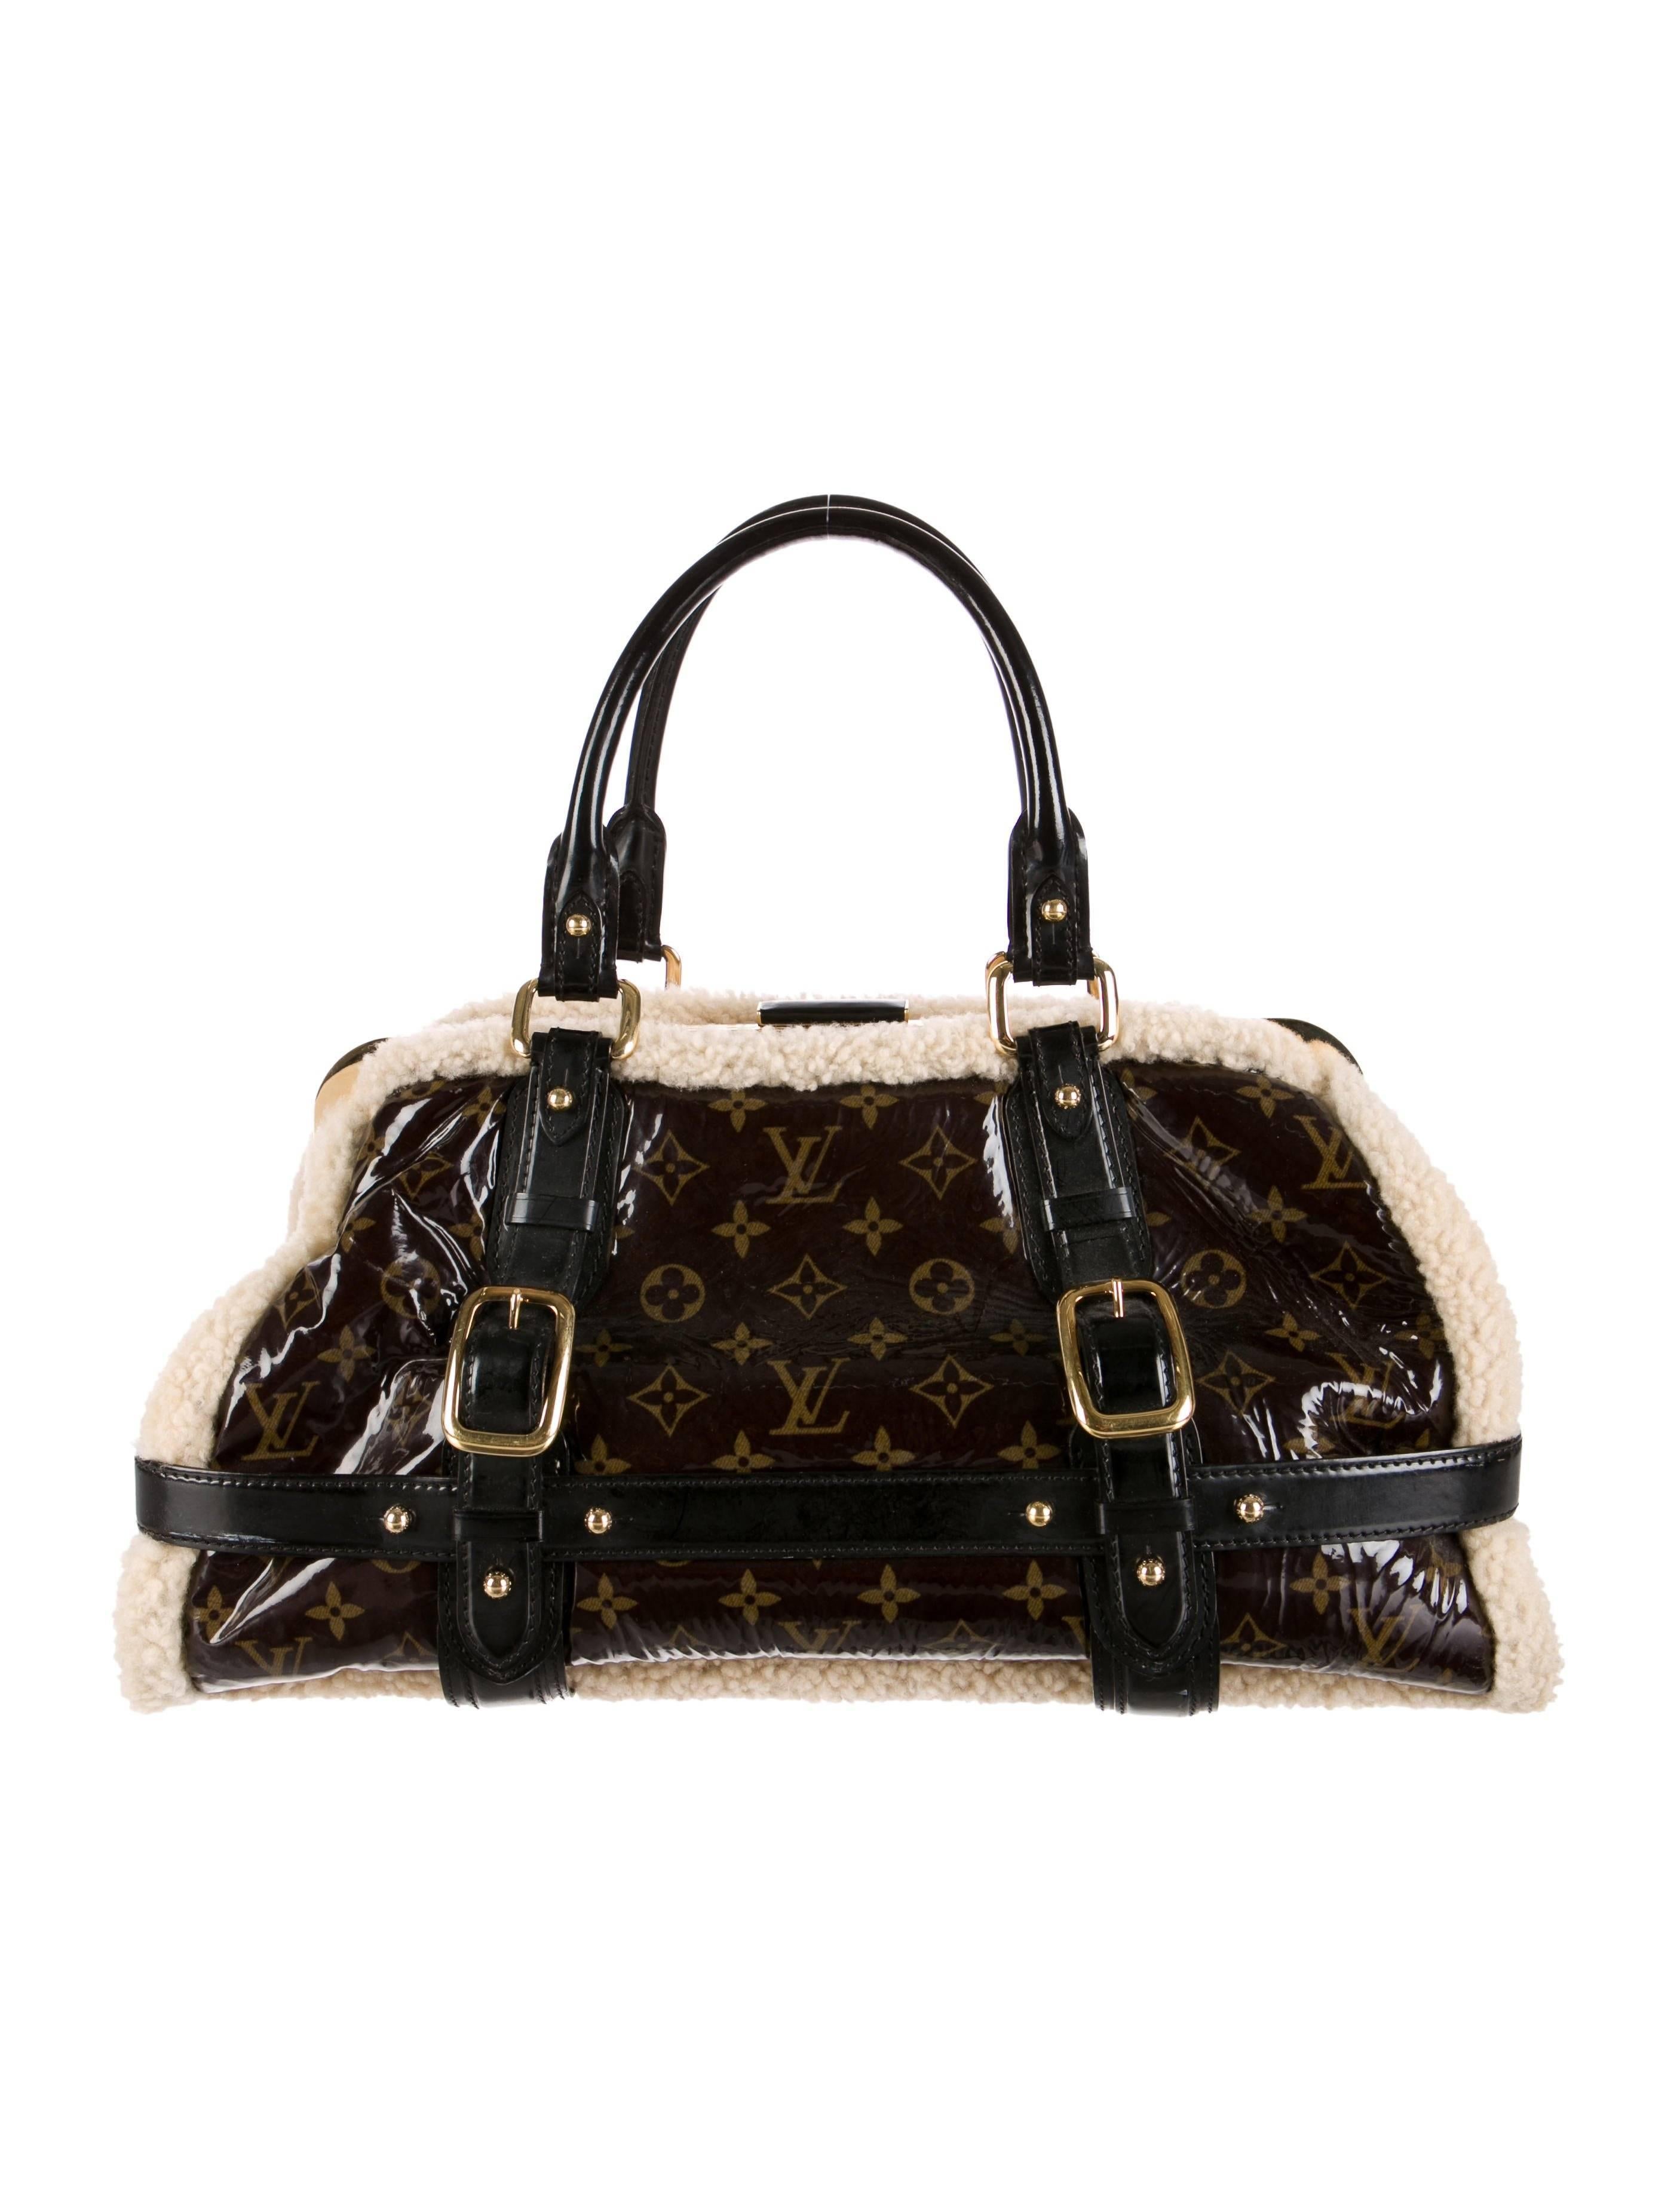 Louis Vuitton Limited Edition Monogram Evening Fur Top Handle Satchel Bag 

Patent leather
Shearling fur
Gold tone hardware
Date code present
Made in Italy
Top handle drop 6"
Measures 17.5" W x 10" H x 7" D  
Includes original